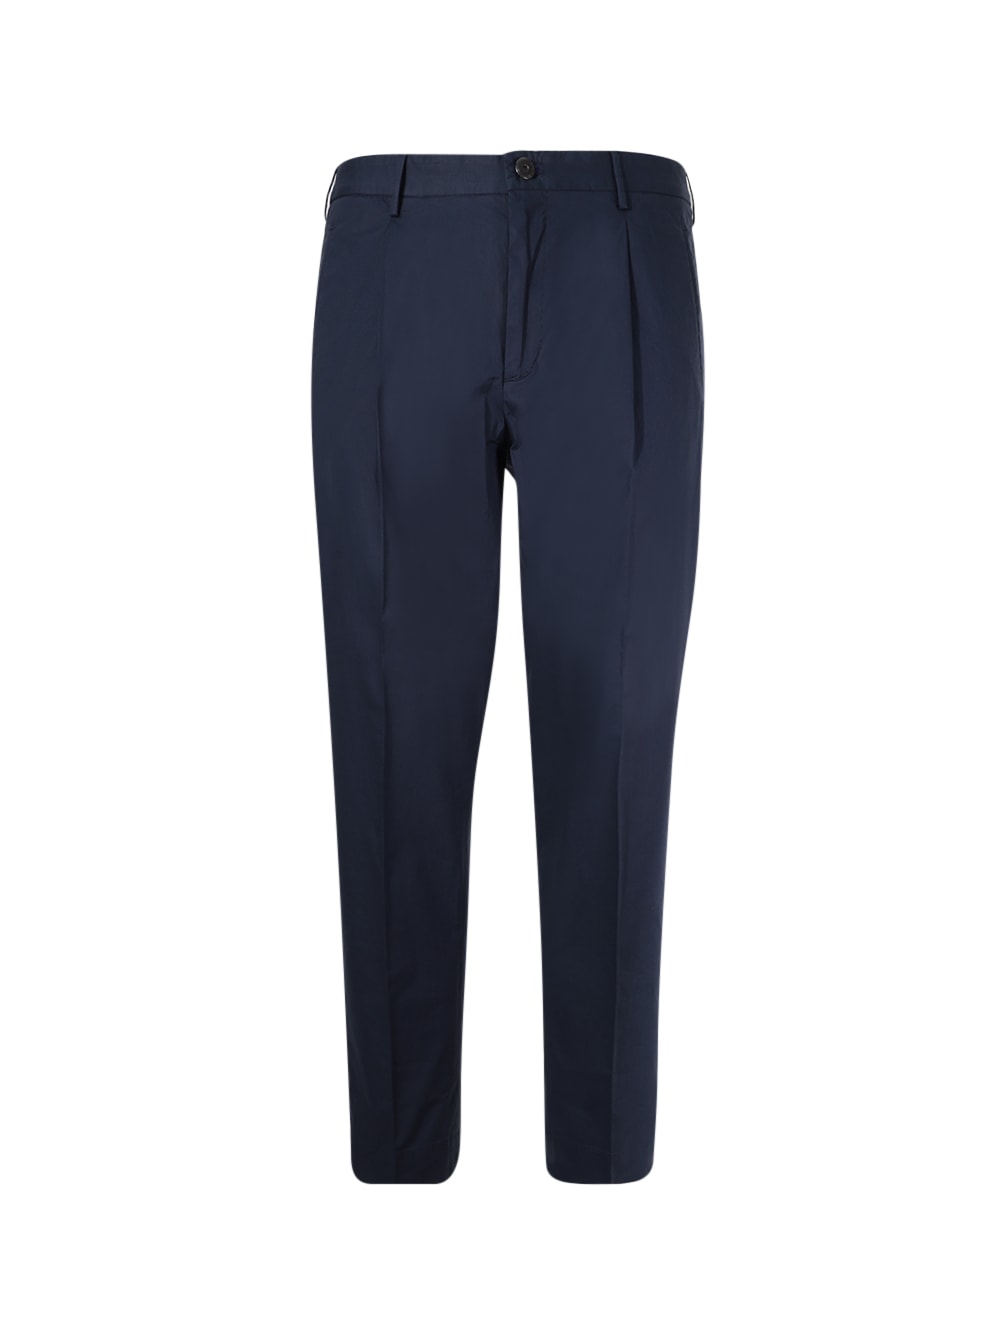 Incotex Trousers With Pleats